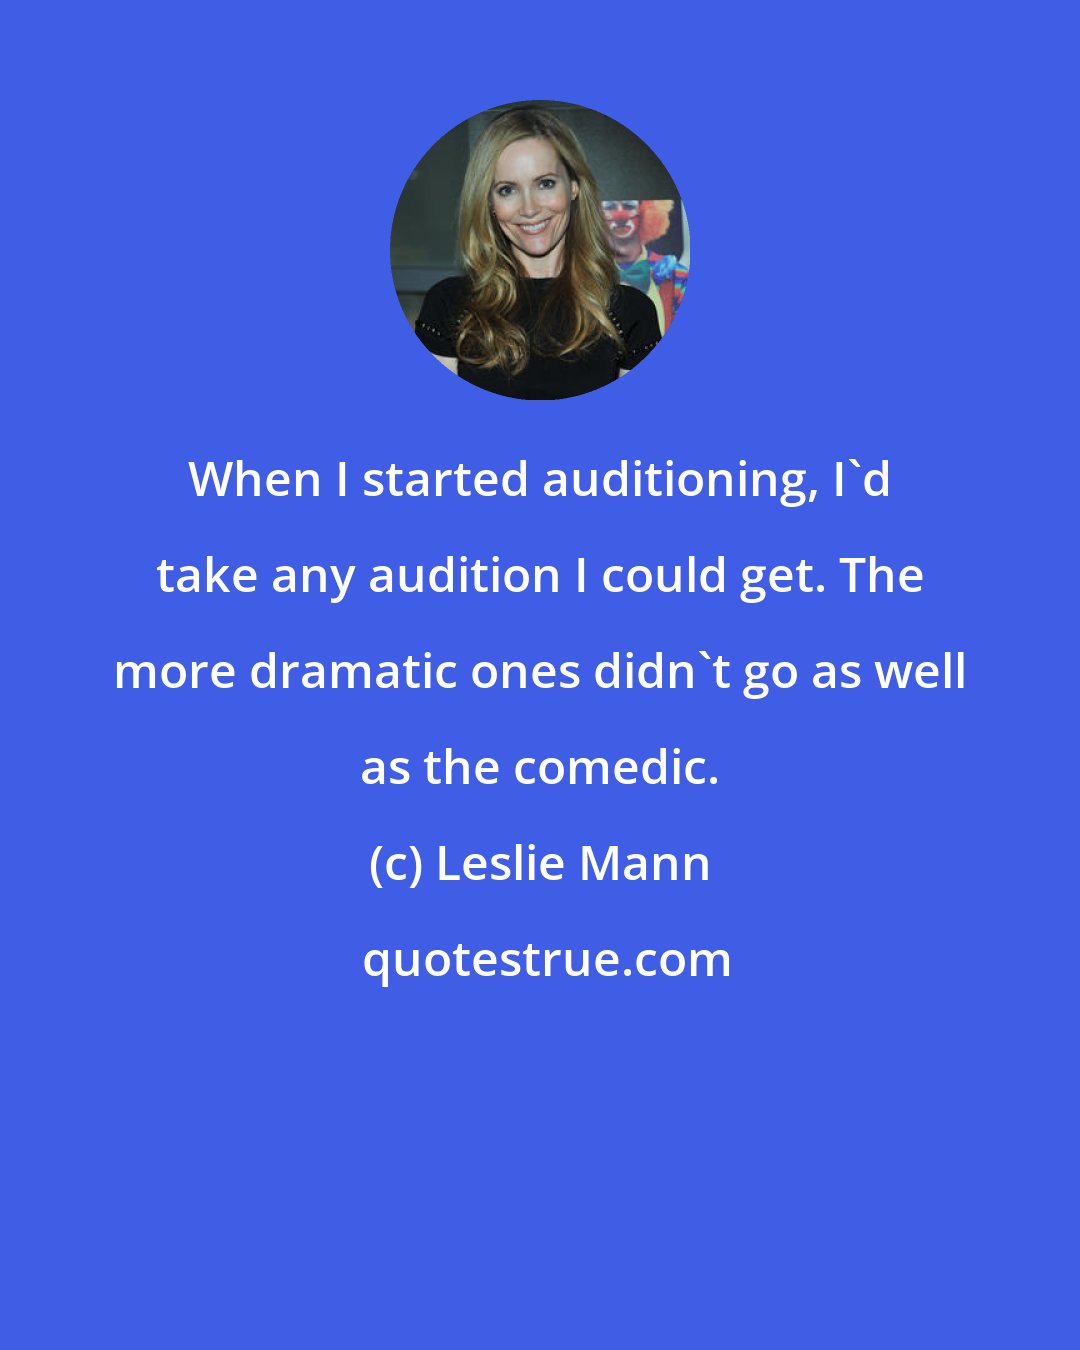 Leslie Mann: When I started auditioning, I'd take any audition I could get. The more dramatic ones didn't go as well as the comedic.